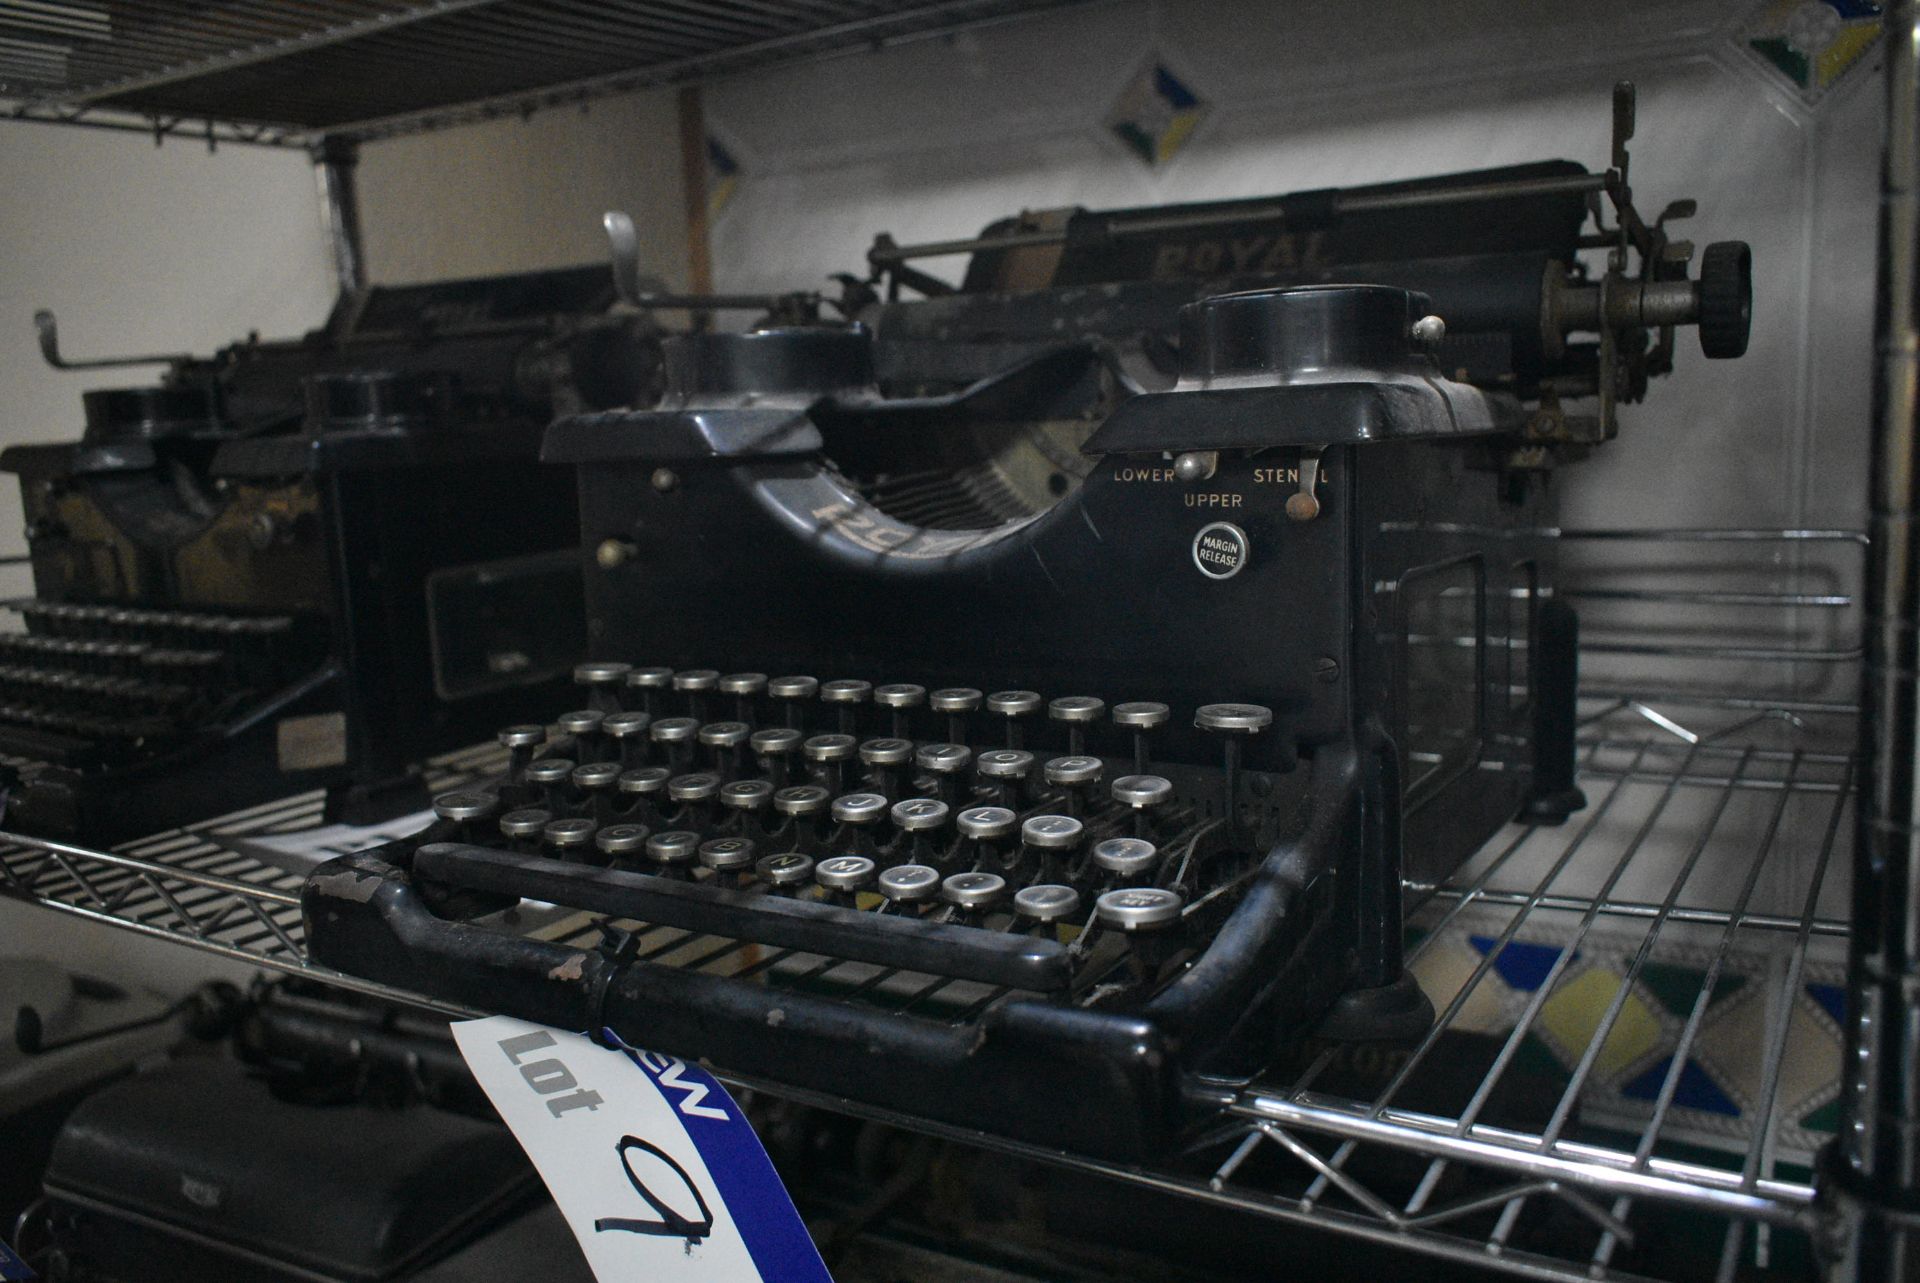 Royal Typewriter (note this lot is not subject to - Image 4 of 4